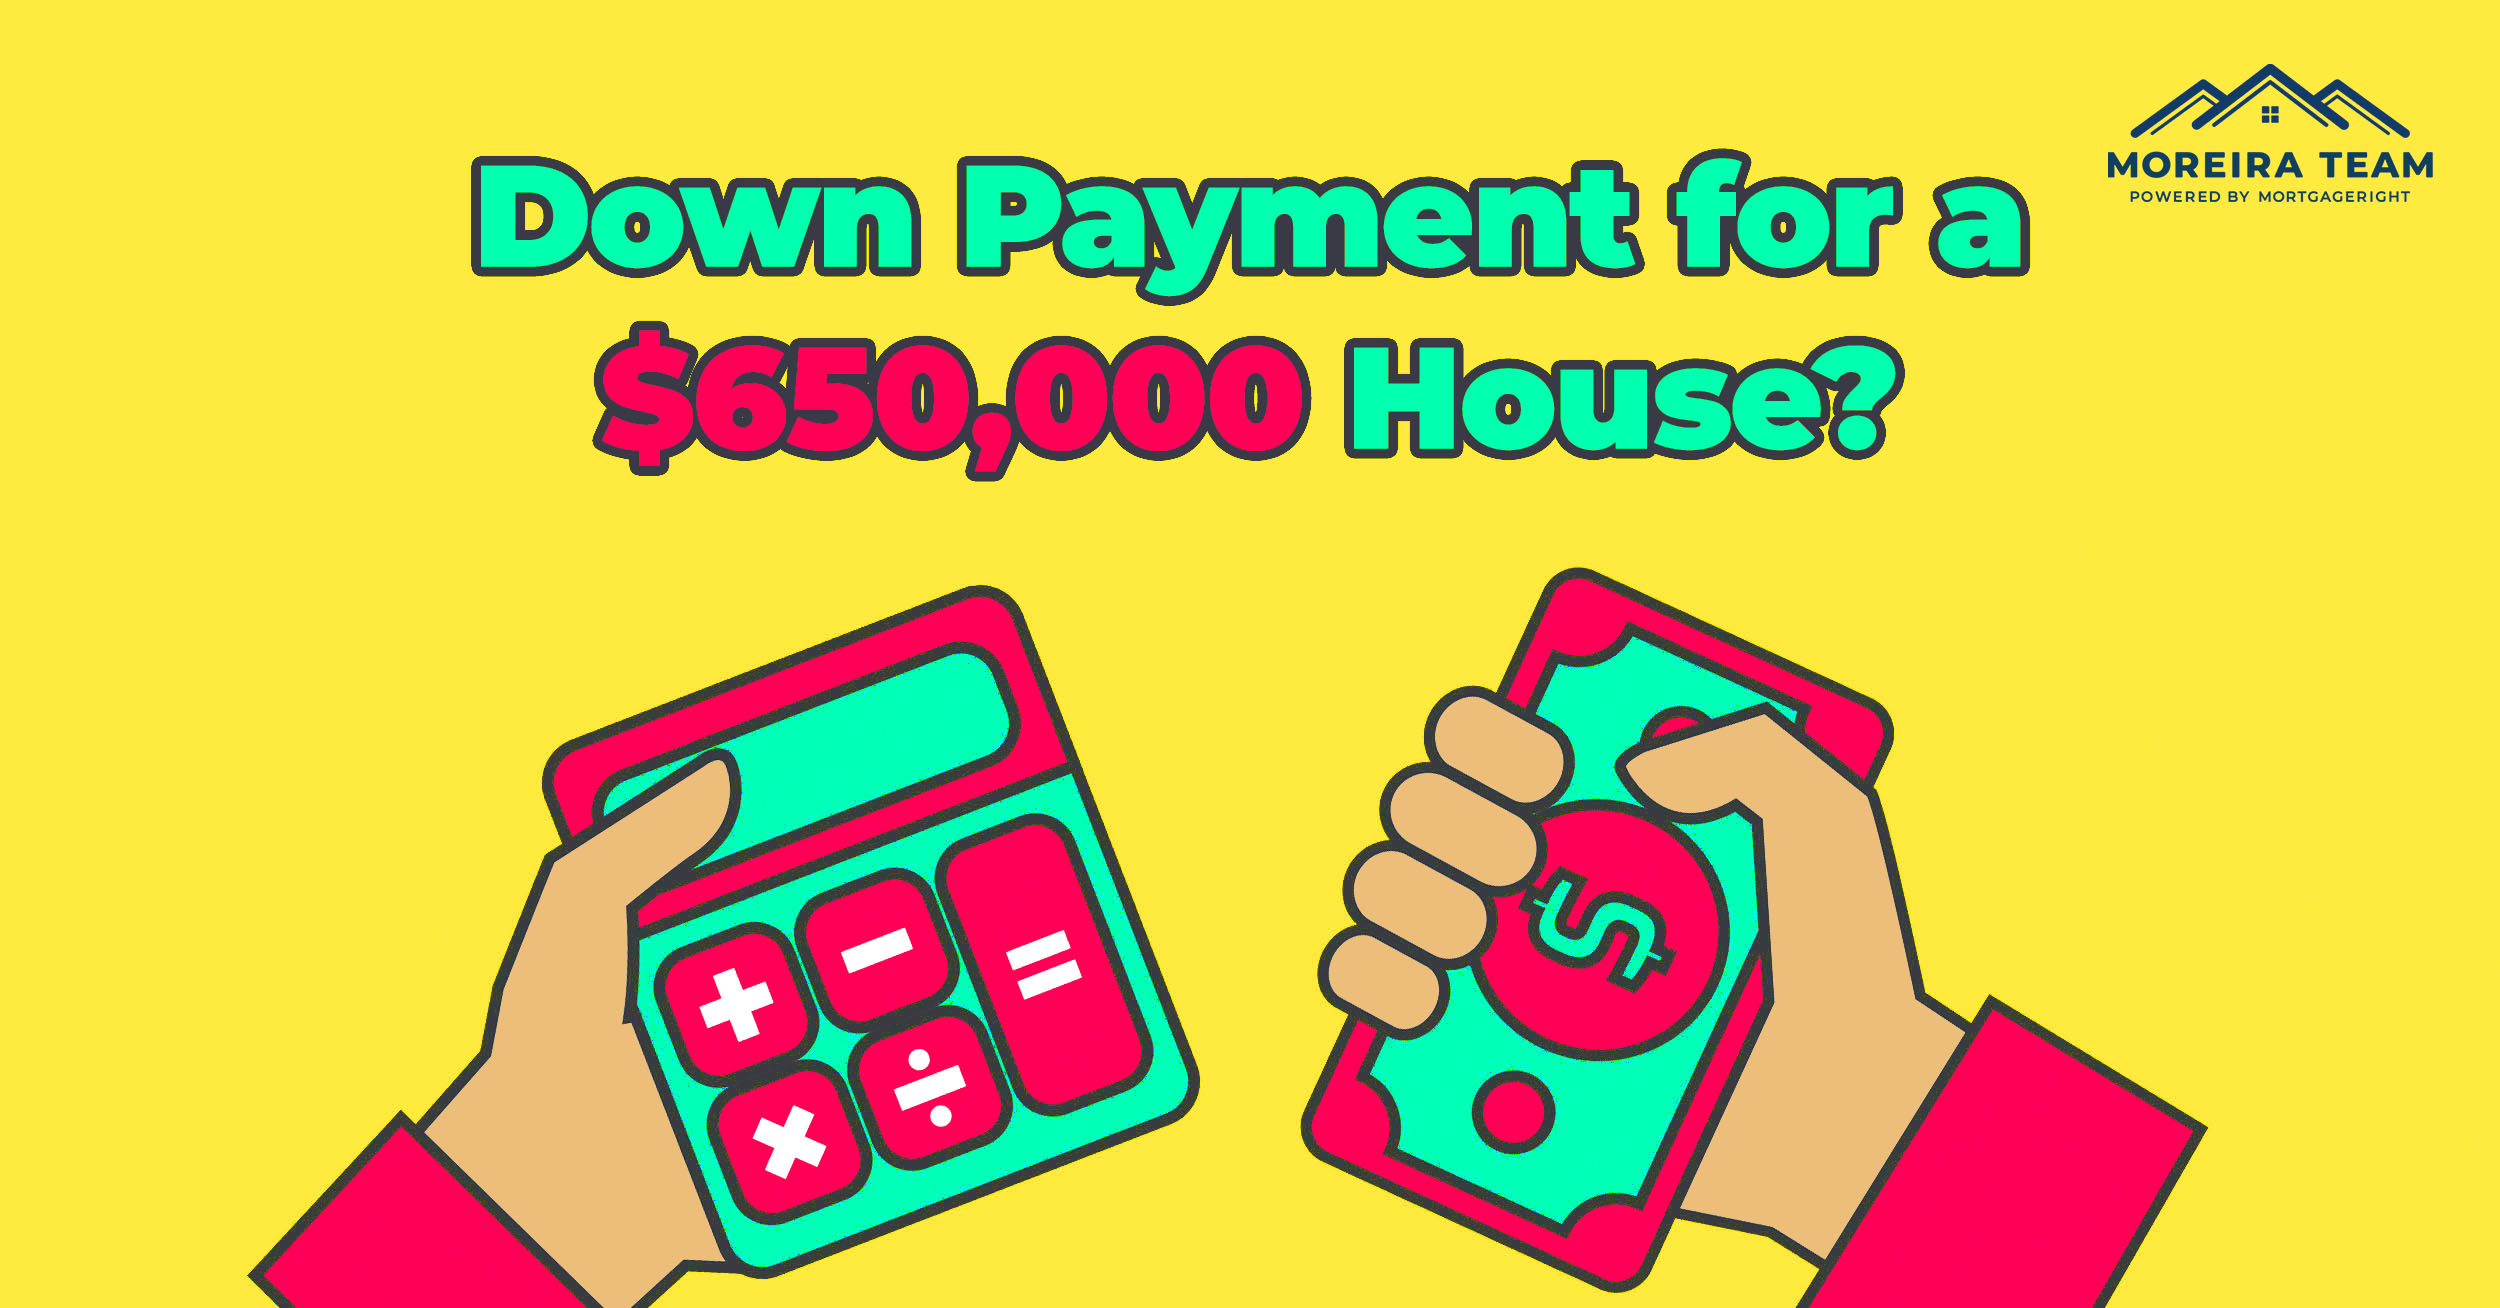 How Much is a Down Payment for a $650,000 Home?